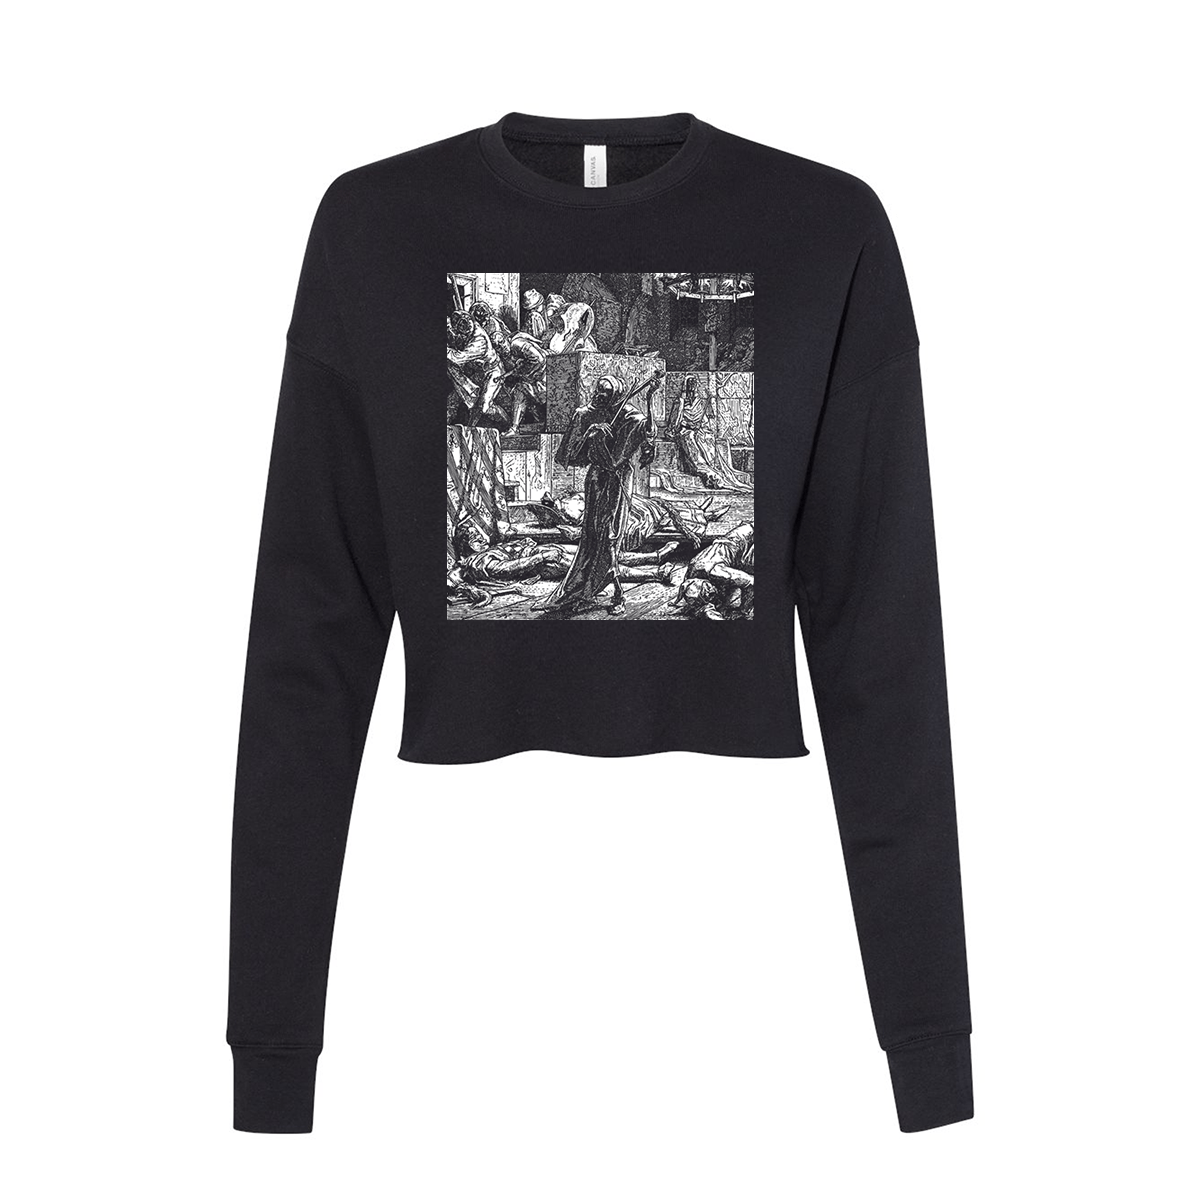 Death the Strangler Crop Top Longsleeve Crop Top by The Roving House